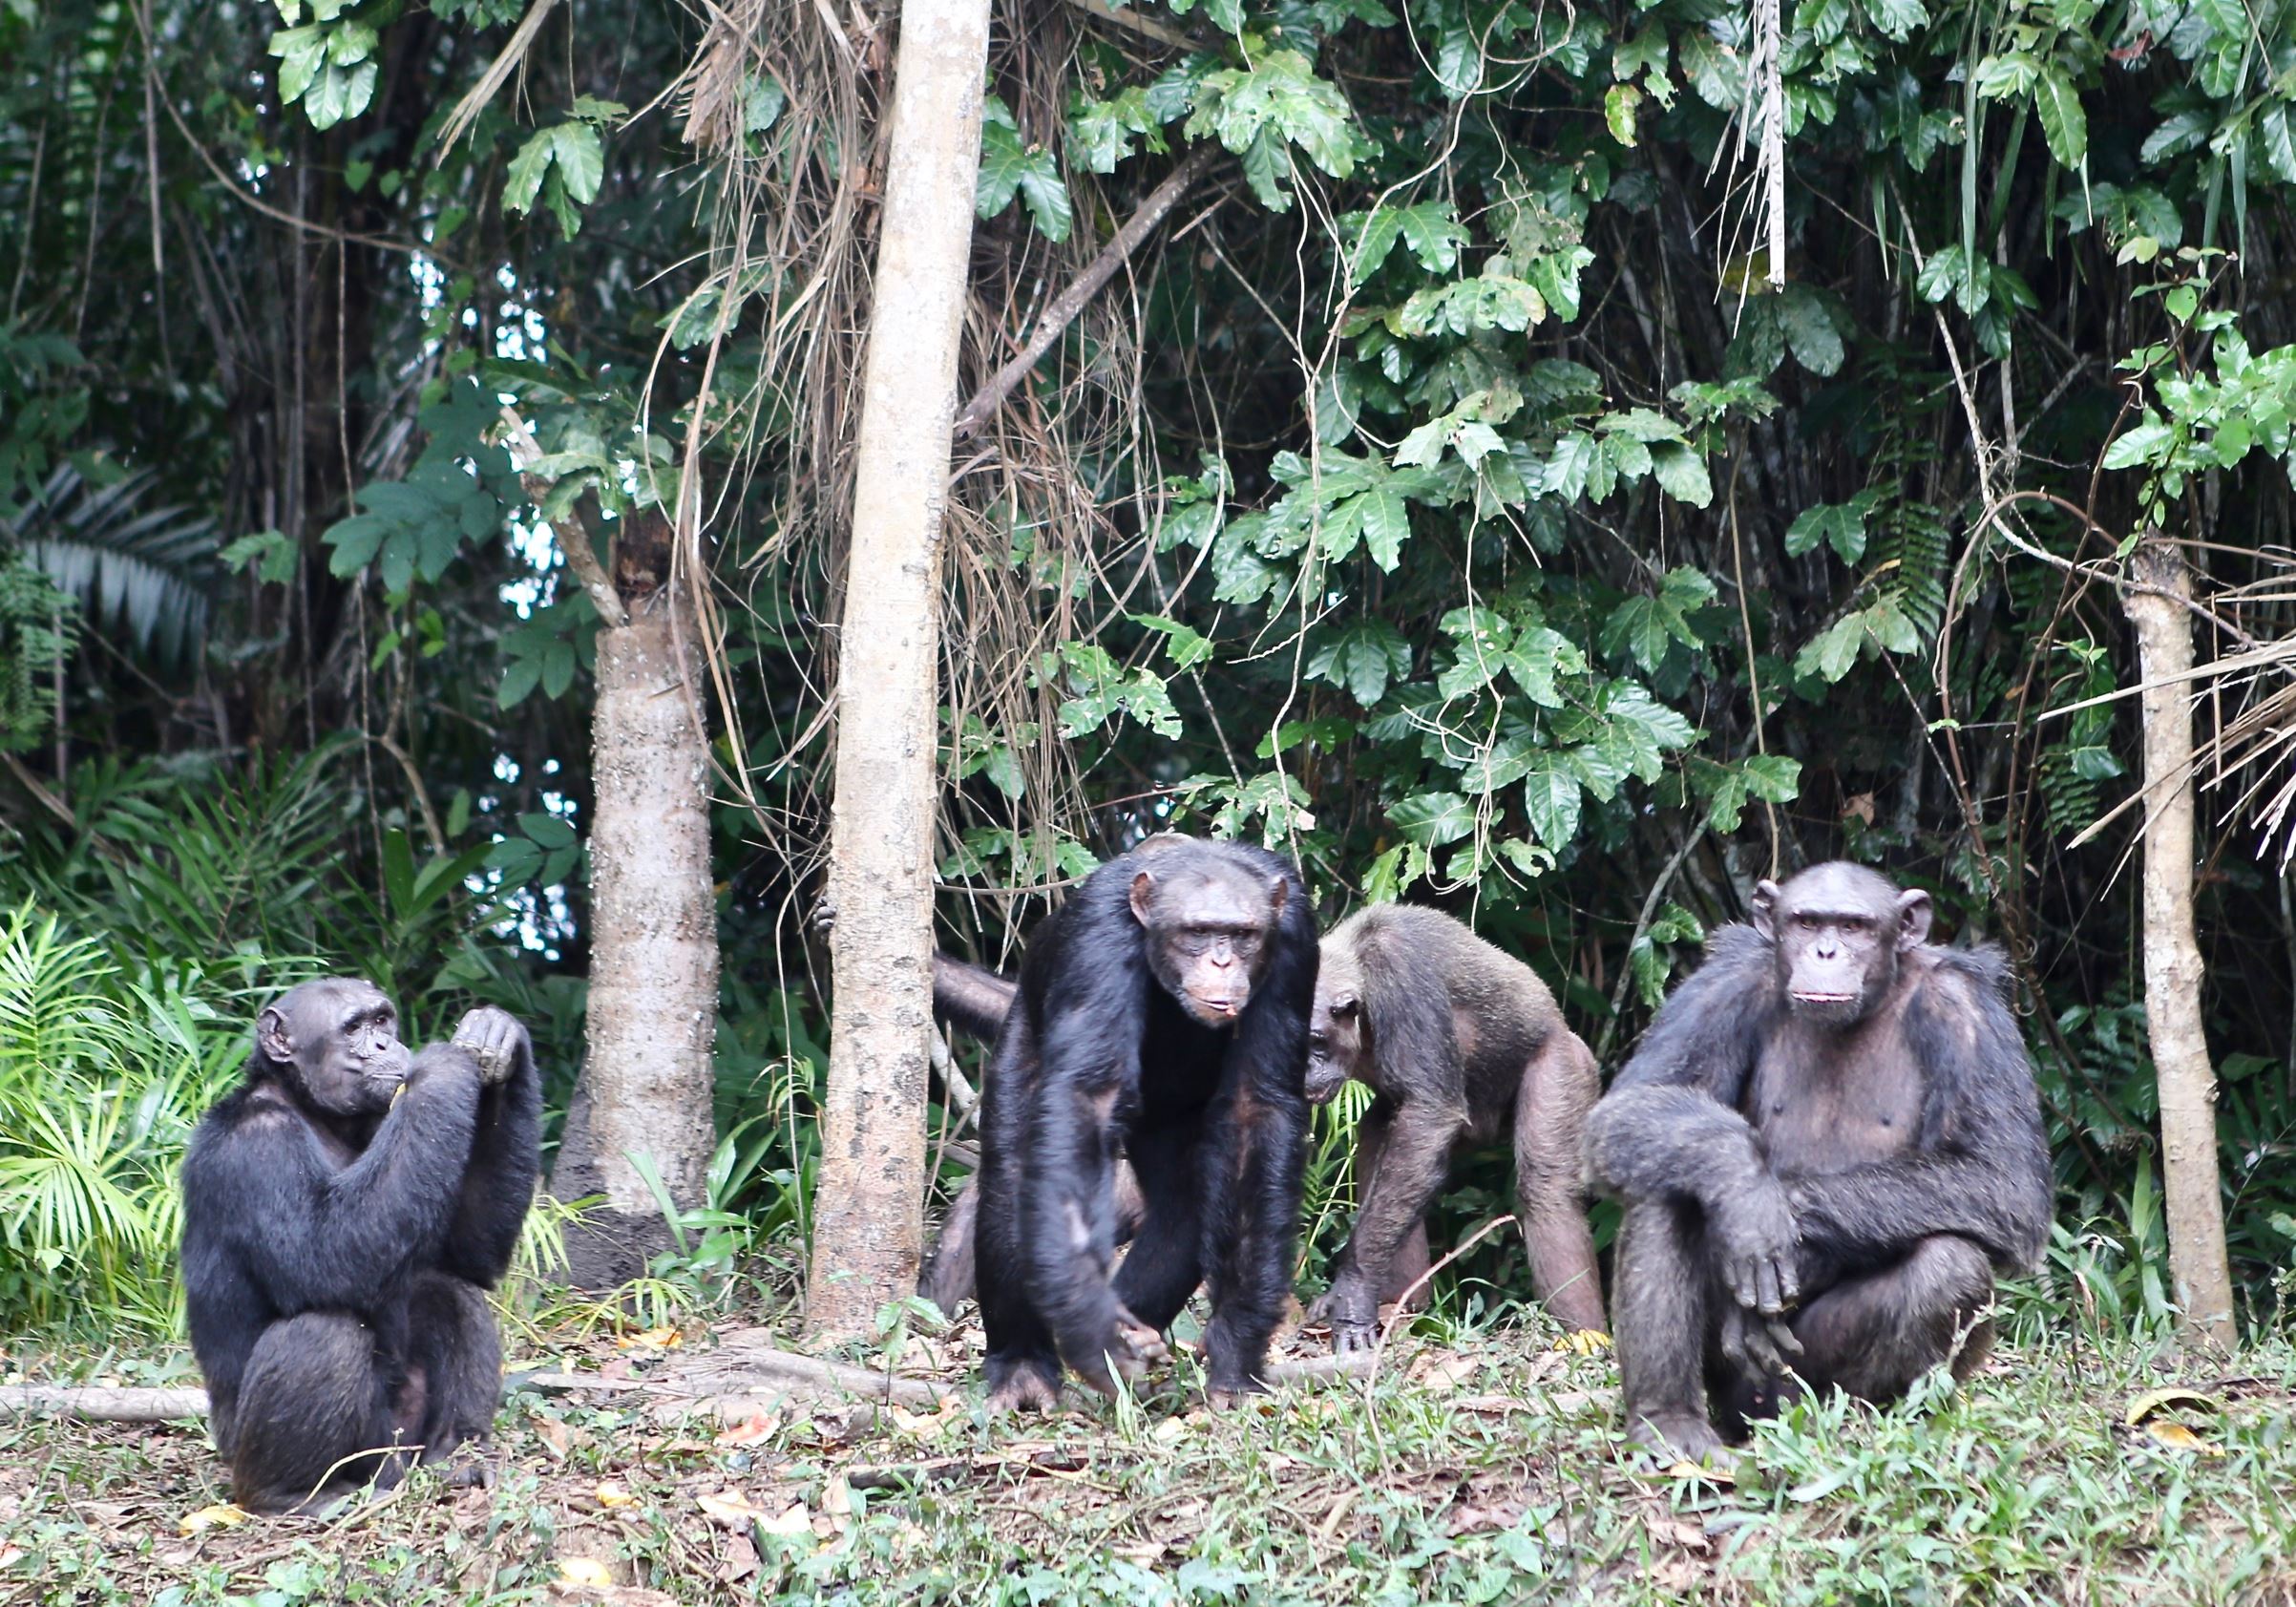 Chimpanzees shown relaxing together